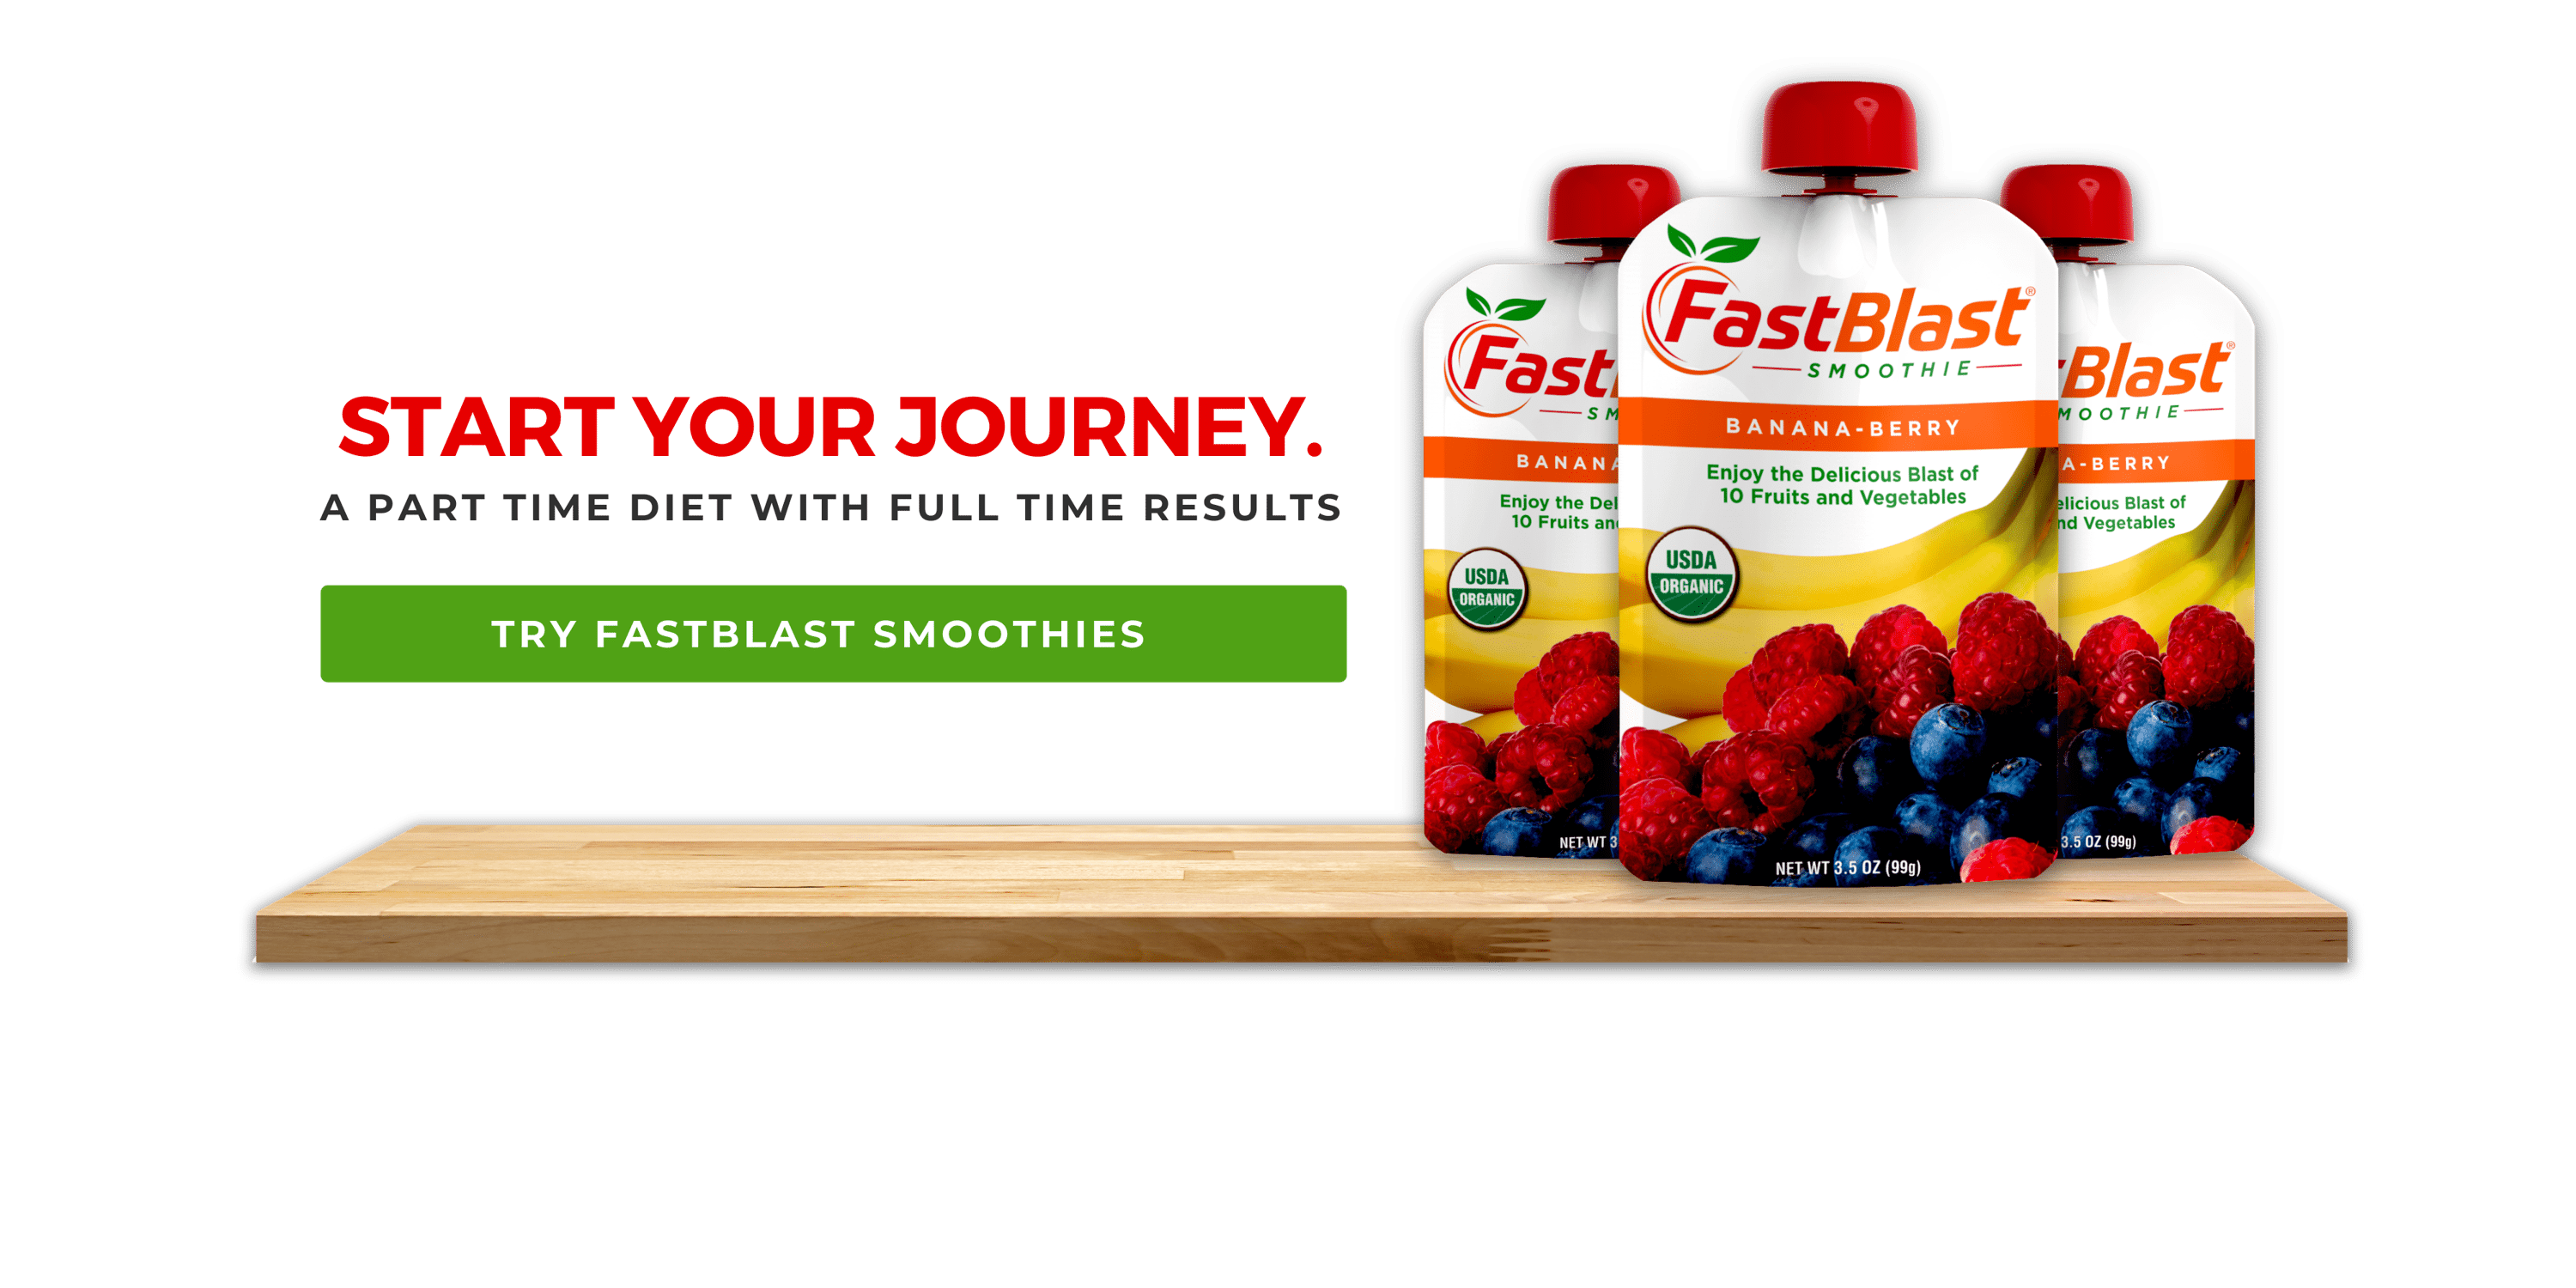 Fastblast smoothies lined up